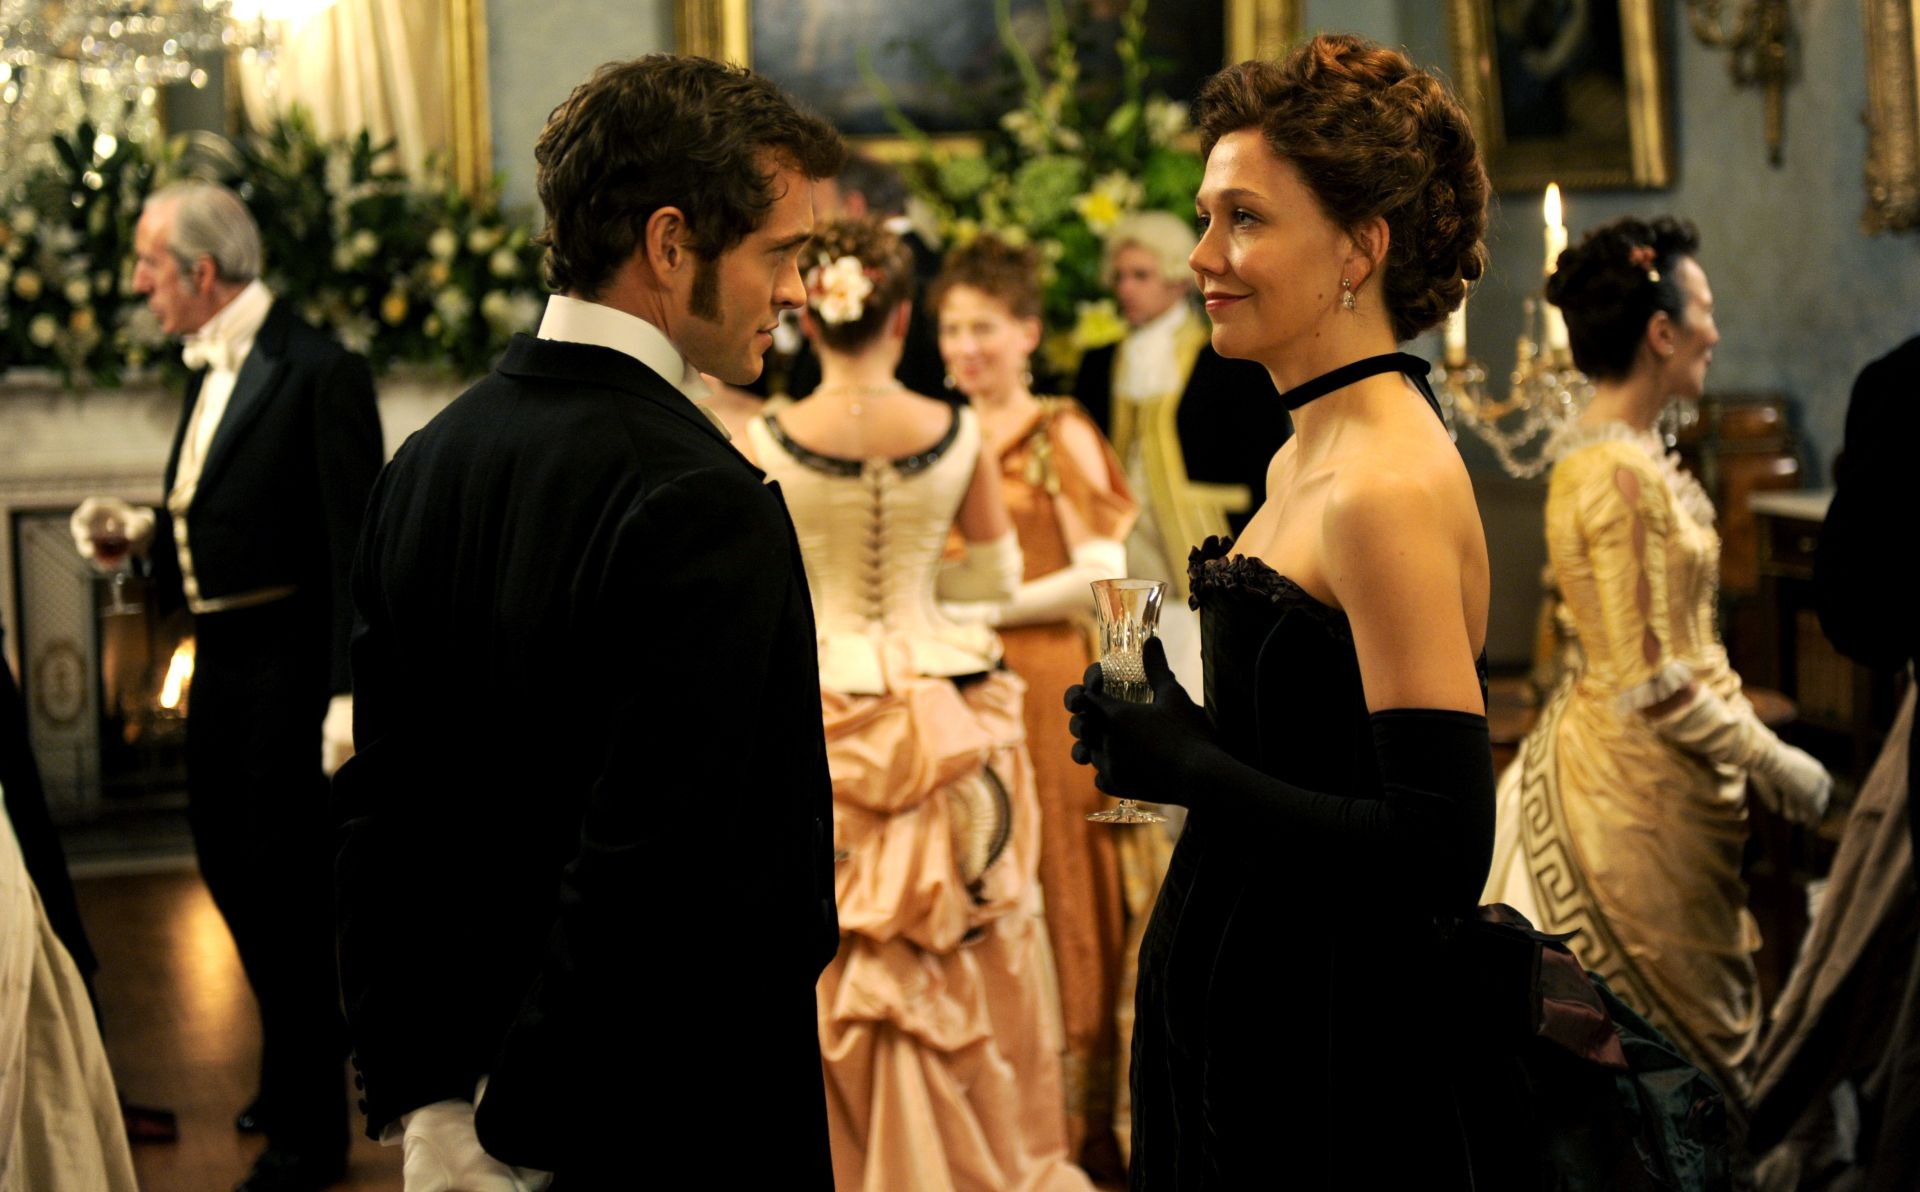 Hugh Dancy stars as Mortimer Granville and Maggie Gyllenhaal stars as Charlotte Dalrymple in Sony Pictures Classics' Hysteria (2012)